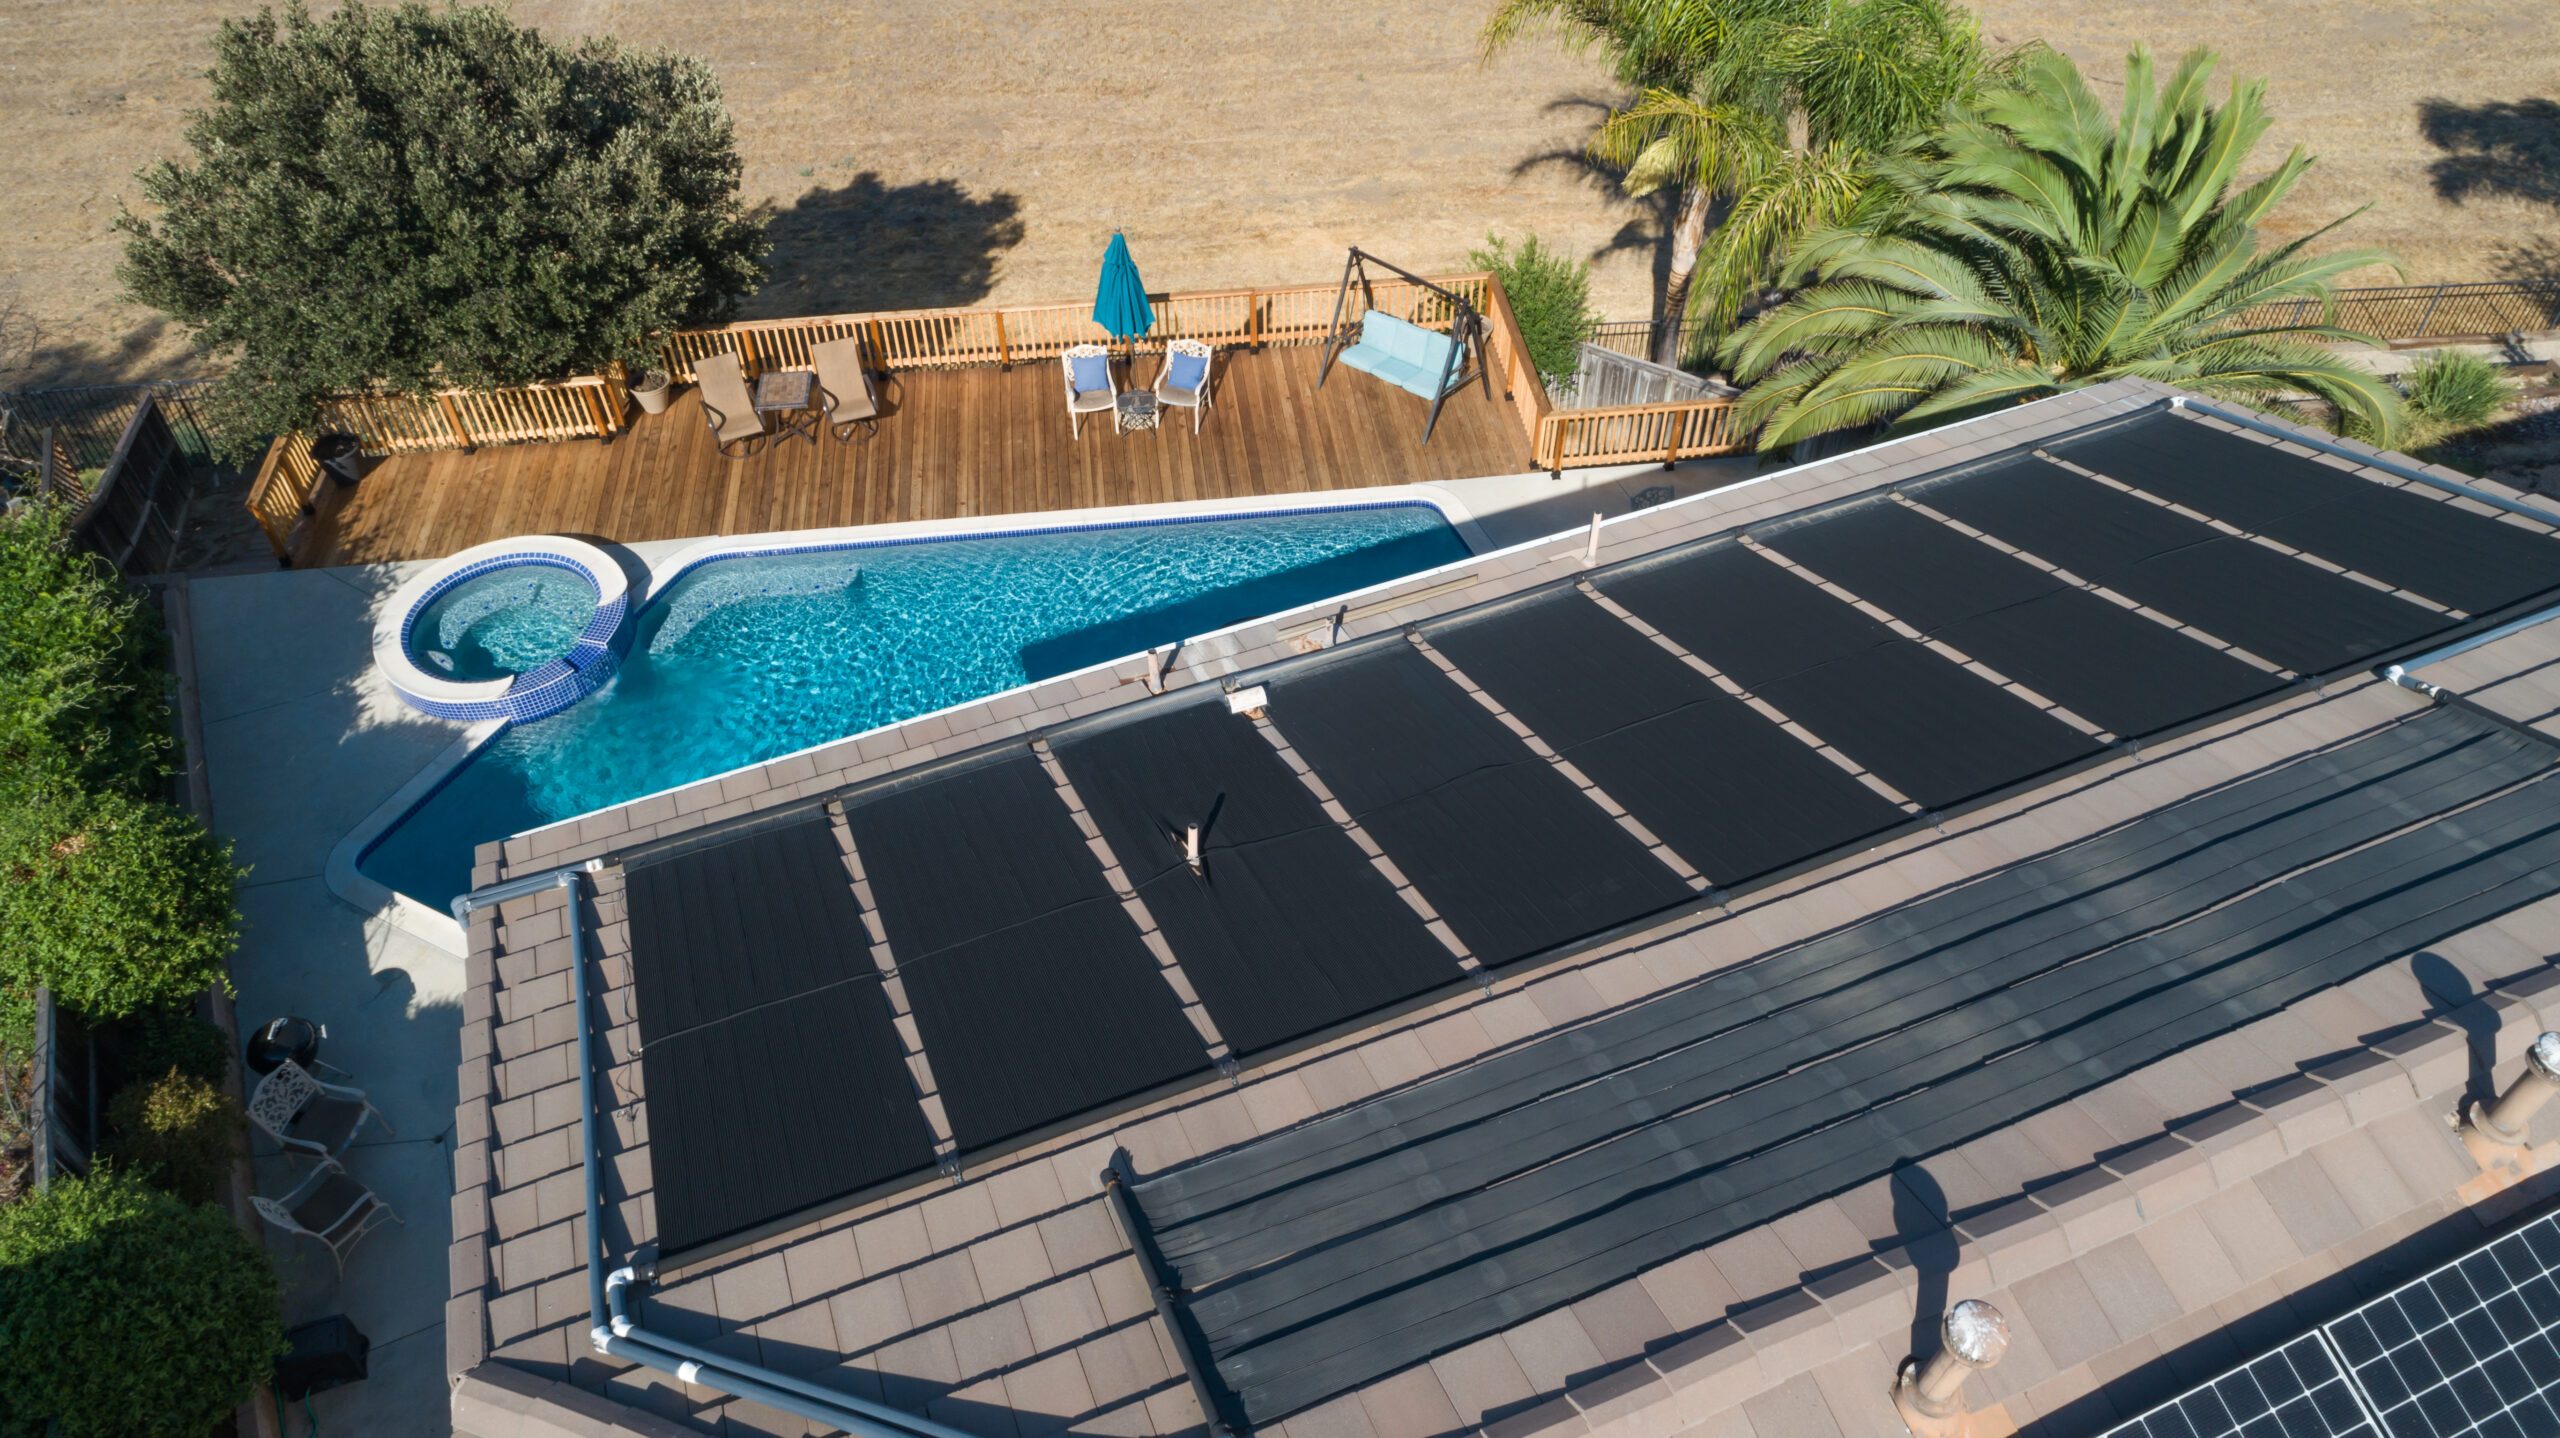 Using solar panels to harness the sun's energy for heating a pool, demonstrating an eco-friendly and sustainable approach to maintaining pool temperature.